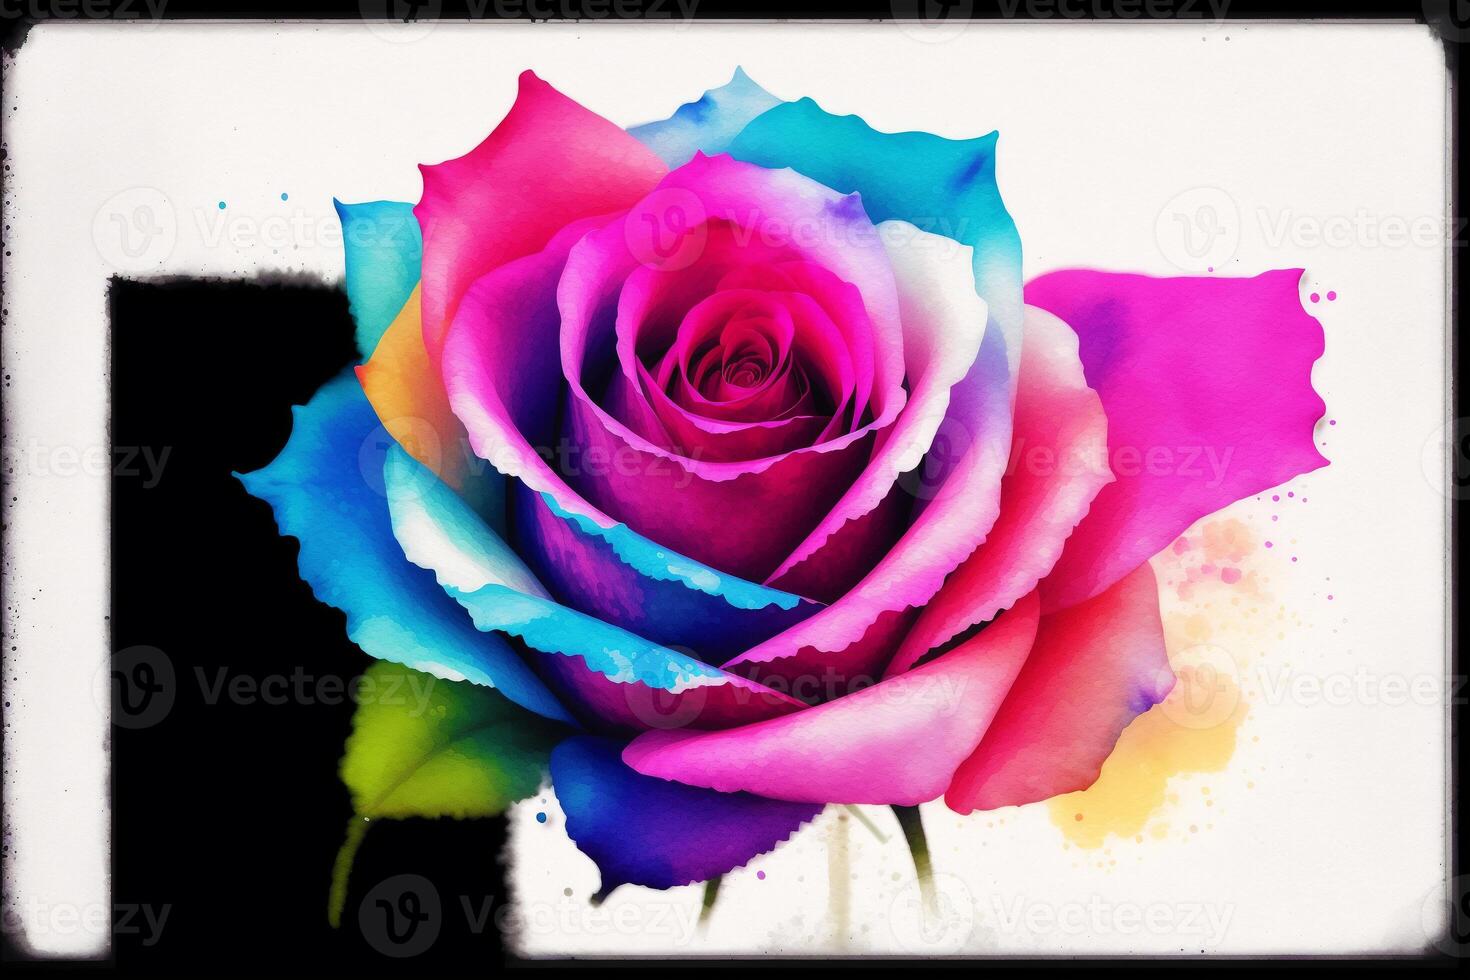 Colorful watercolor background with a rose in the center and a place for your text. Watercolor paint. Digital art, photo